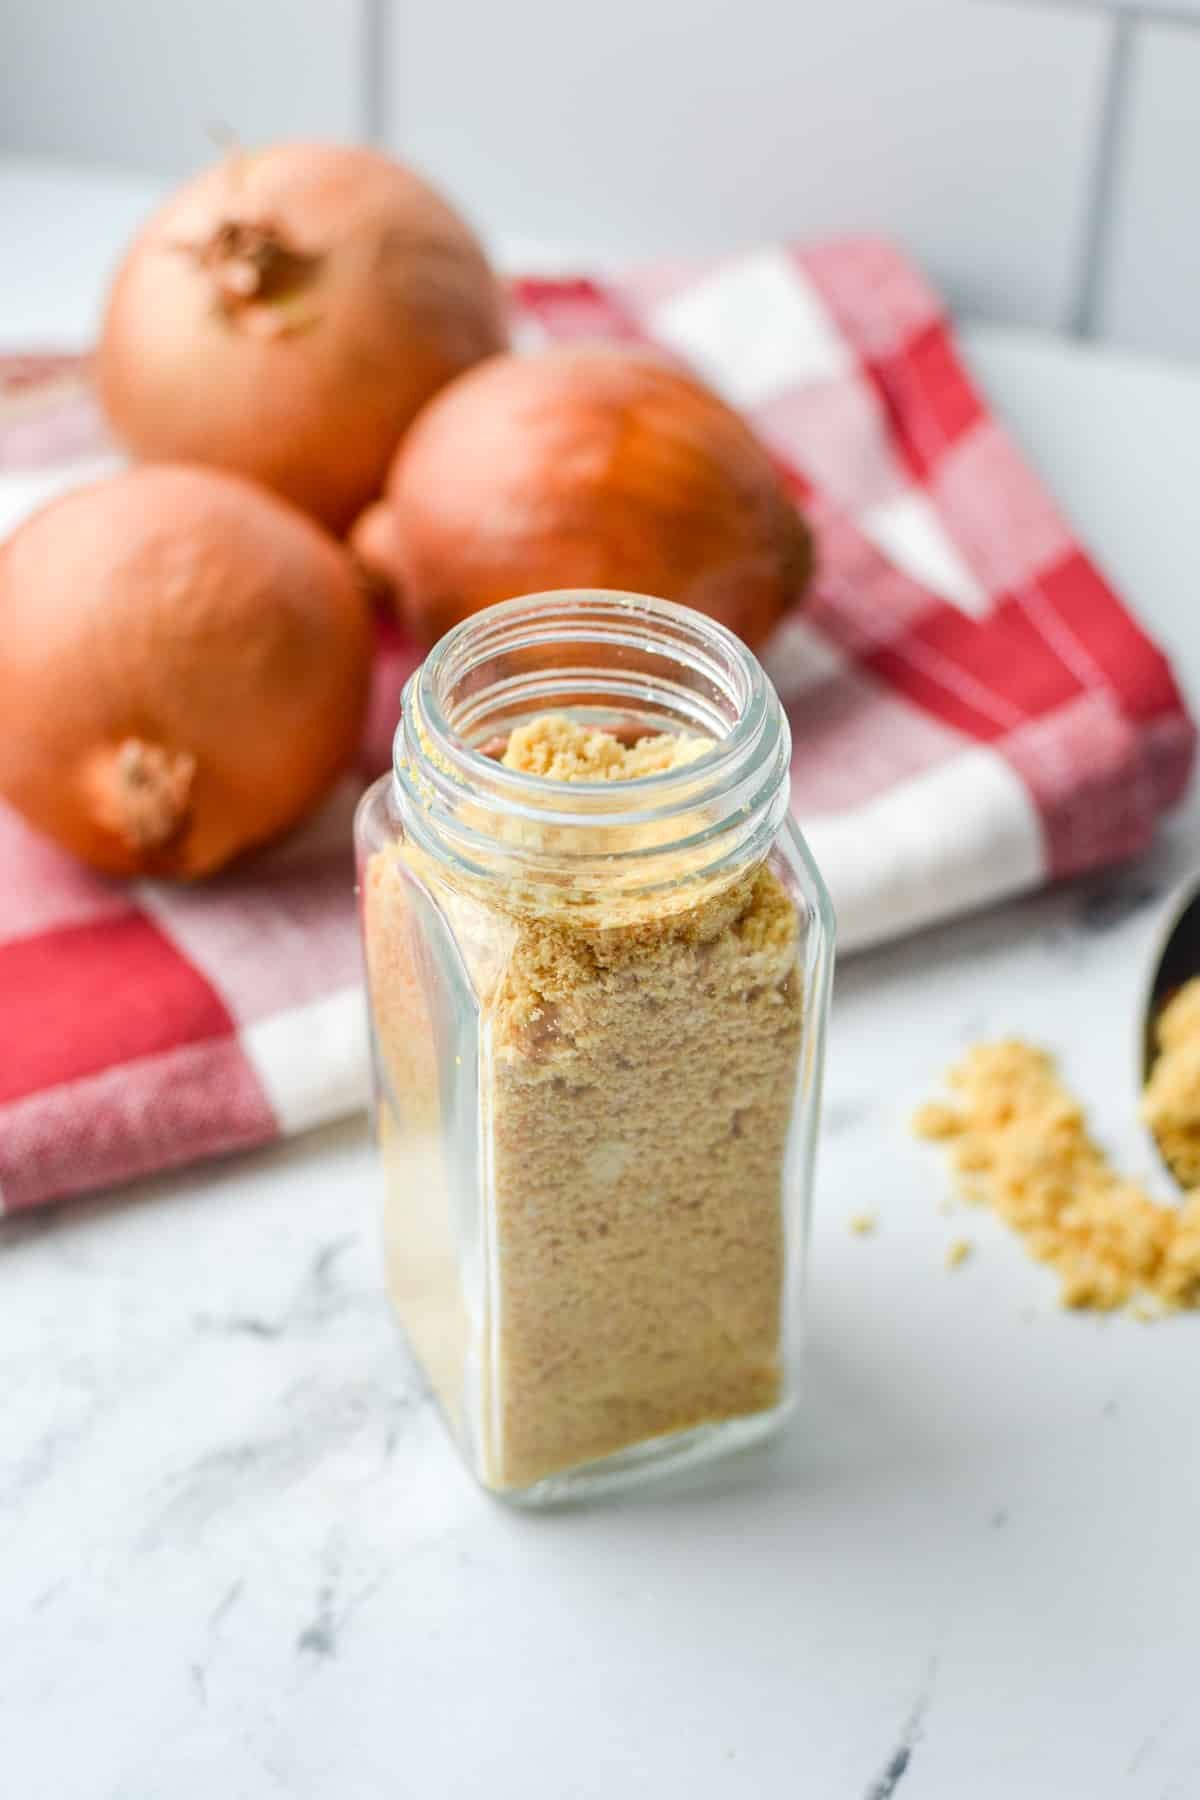 A small spice jar filled with onion powder.